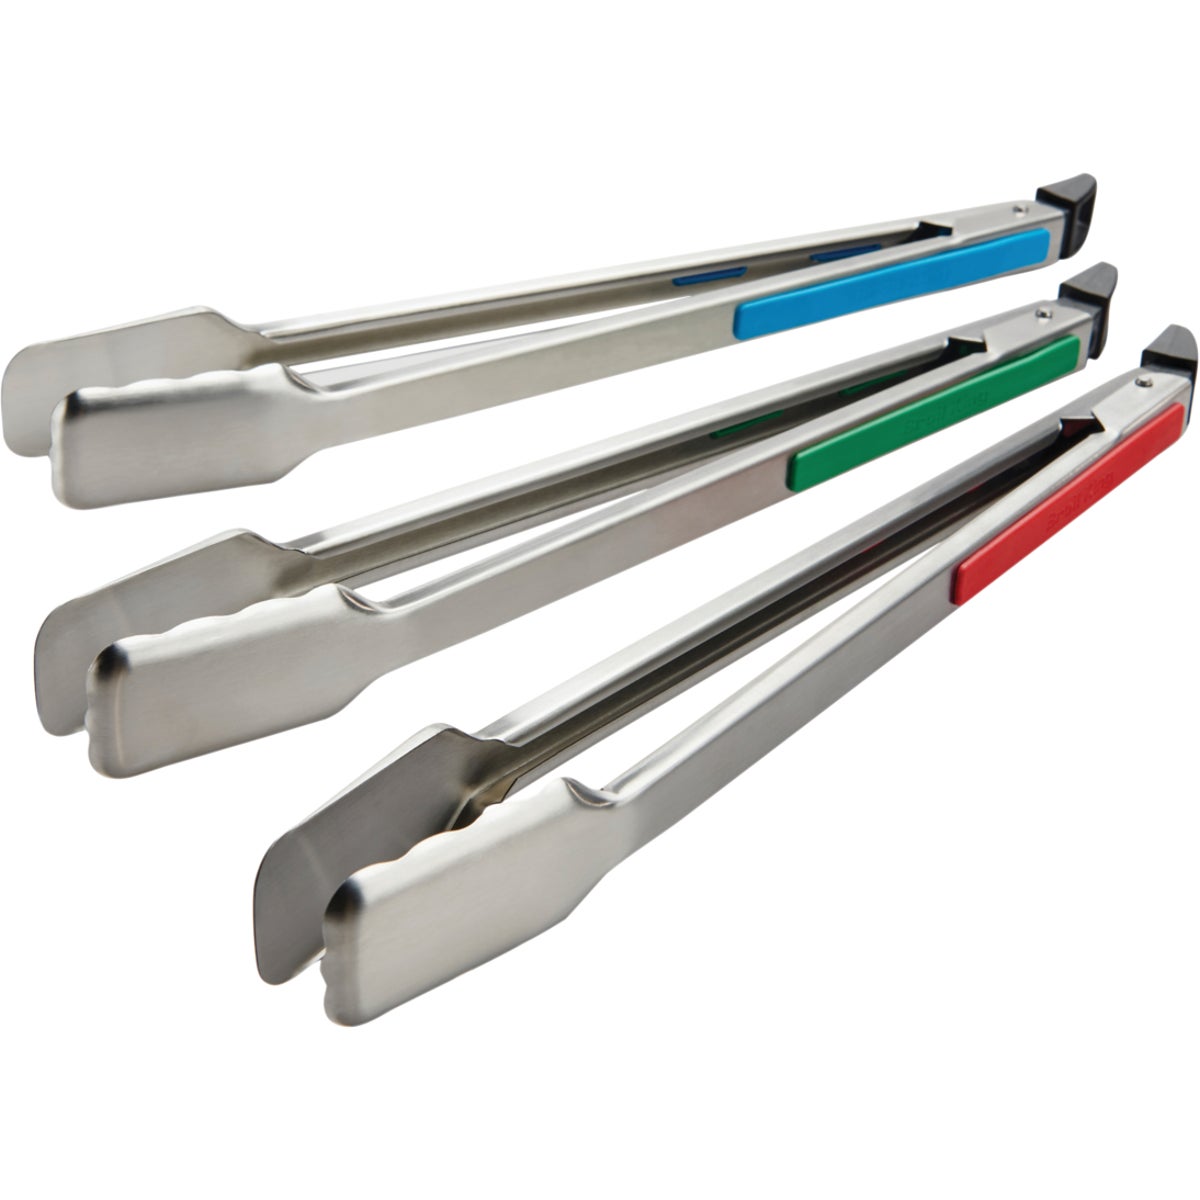 Broil King 17.72 In. Stainless Steel Color-Coded Barbeque Tongs